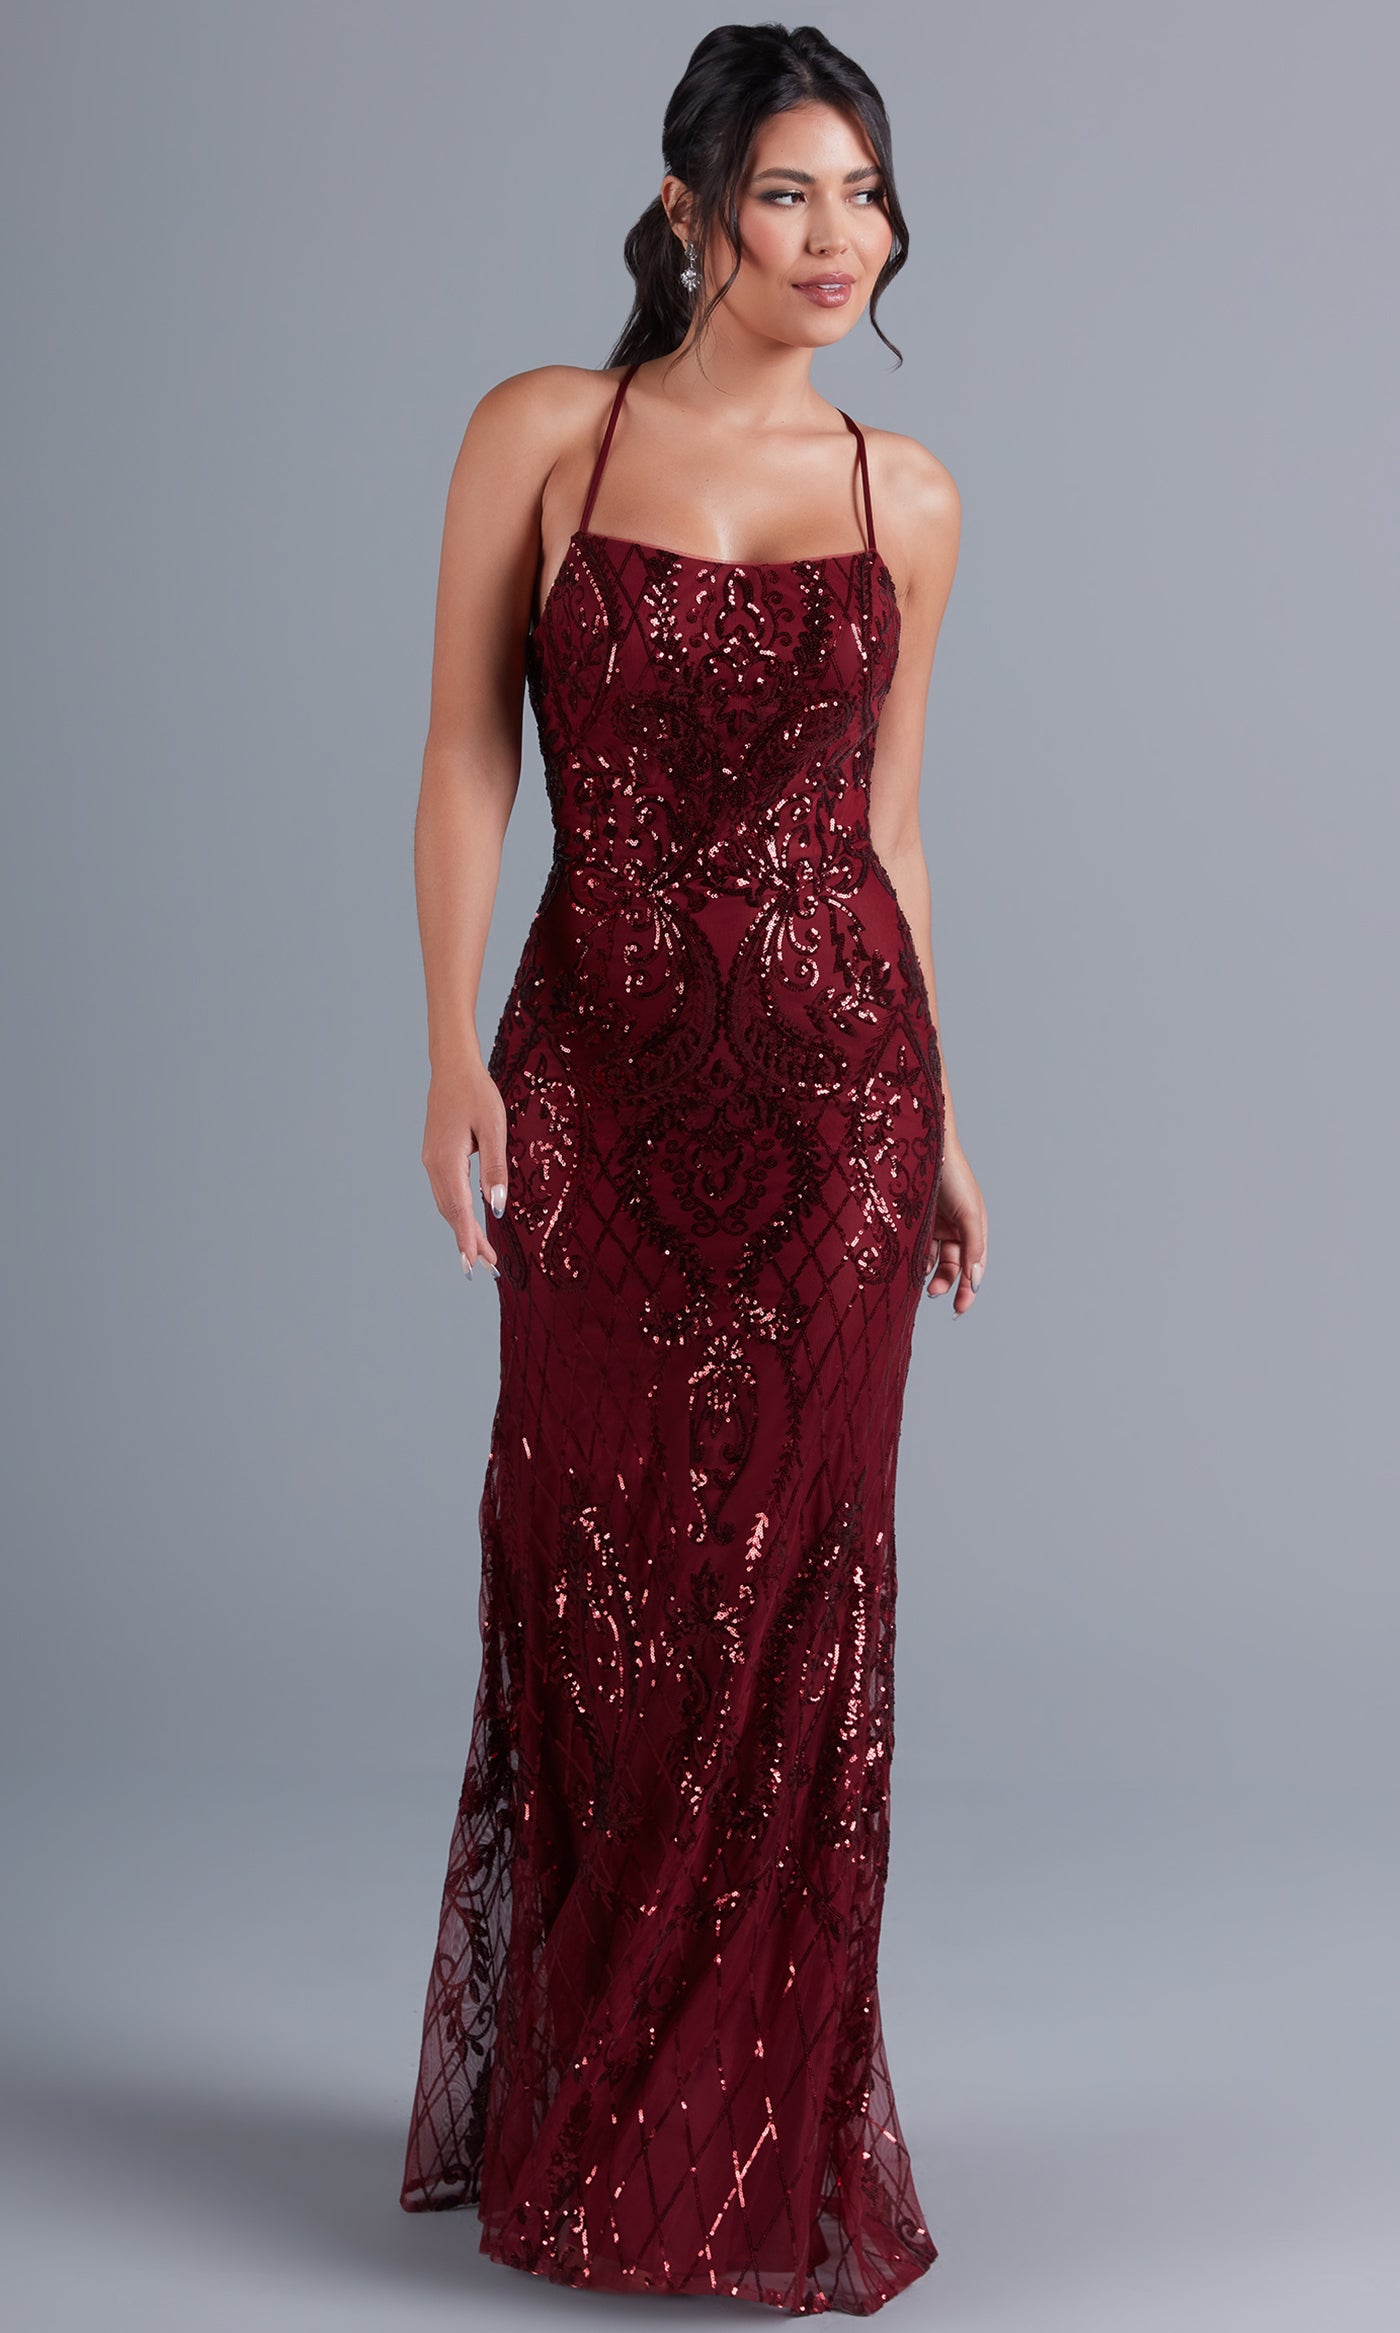 Burgundy Sequin-Print Long Formal Dress with Statement Back